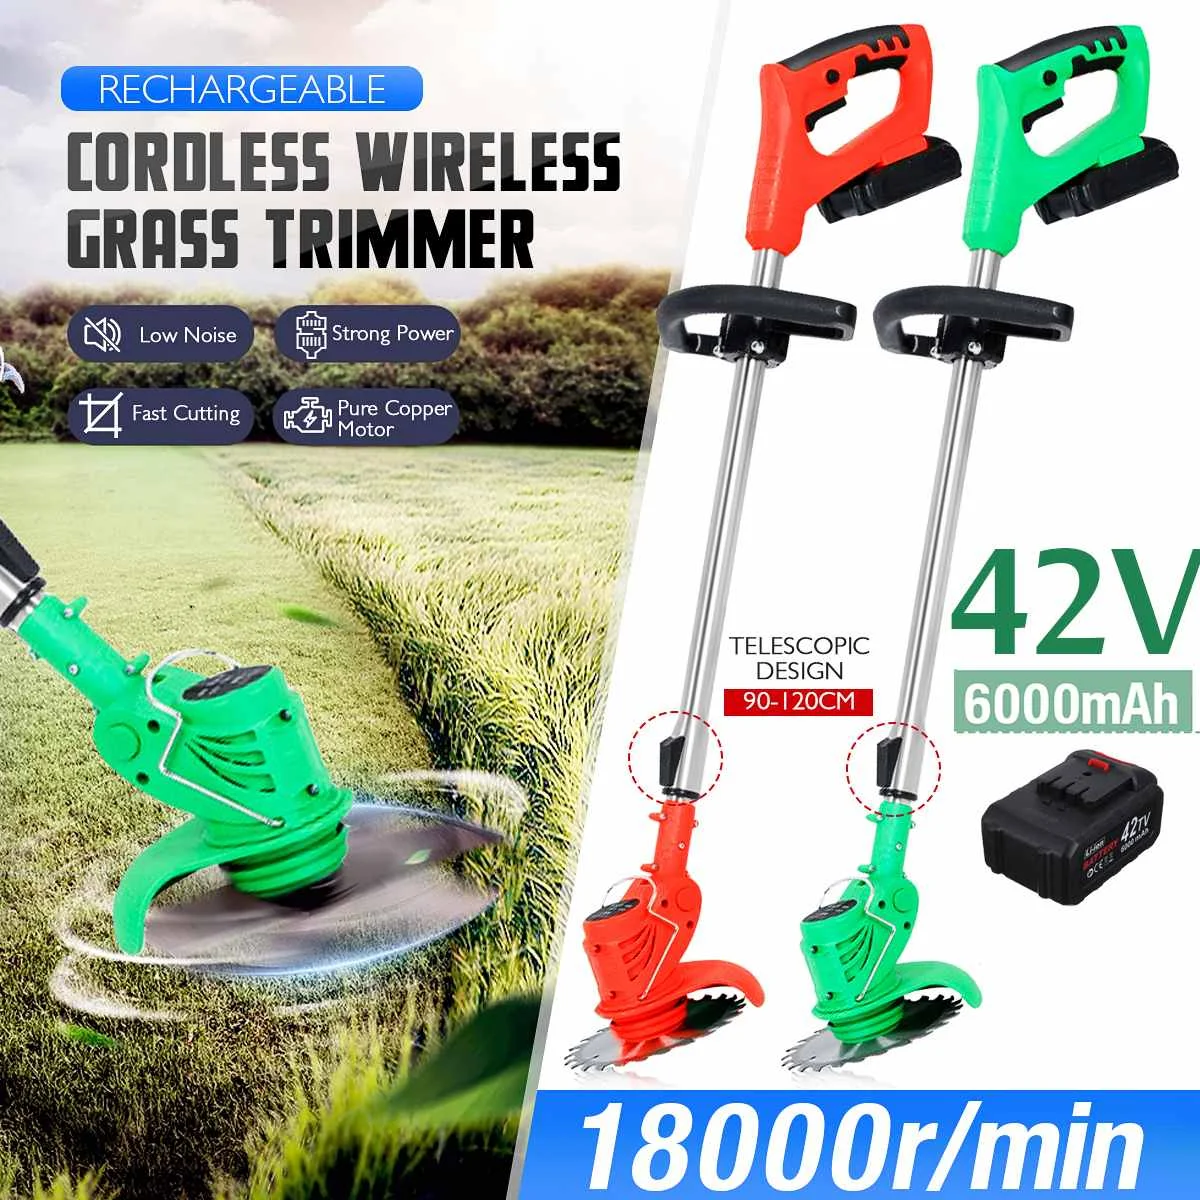 

42V Electric Lawn Mower Rechargeable Battery 18000RPM Cordless Grass Trimmer Household Portable Garden Home Trimming Machine